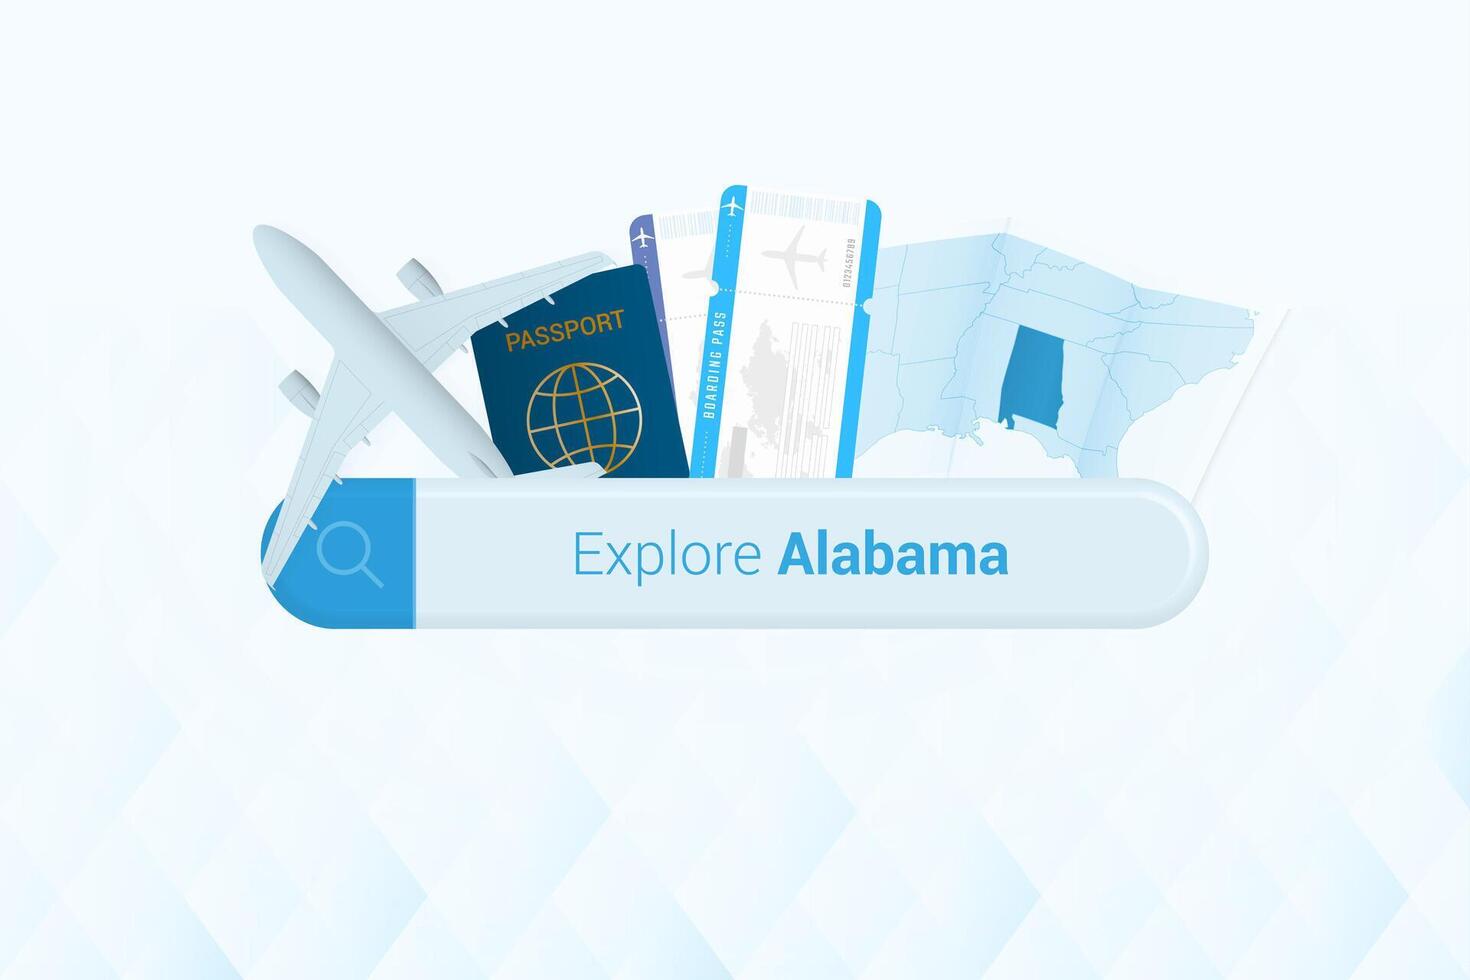 Searching tickets to Alabama or travel destination in Alabama. Searching bar with airplane, passport, boarding pass, tickets and map. vector